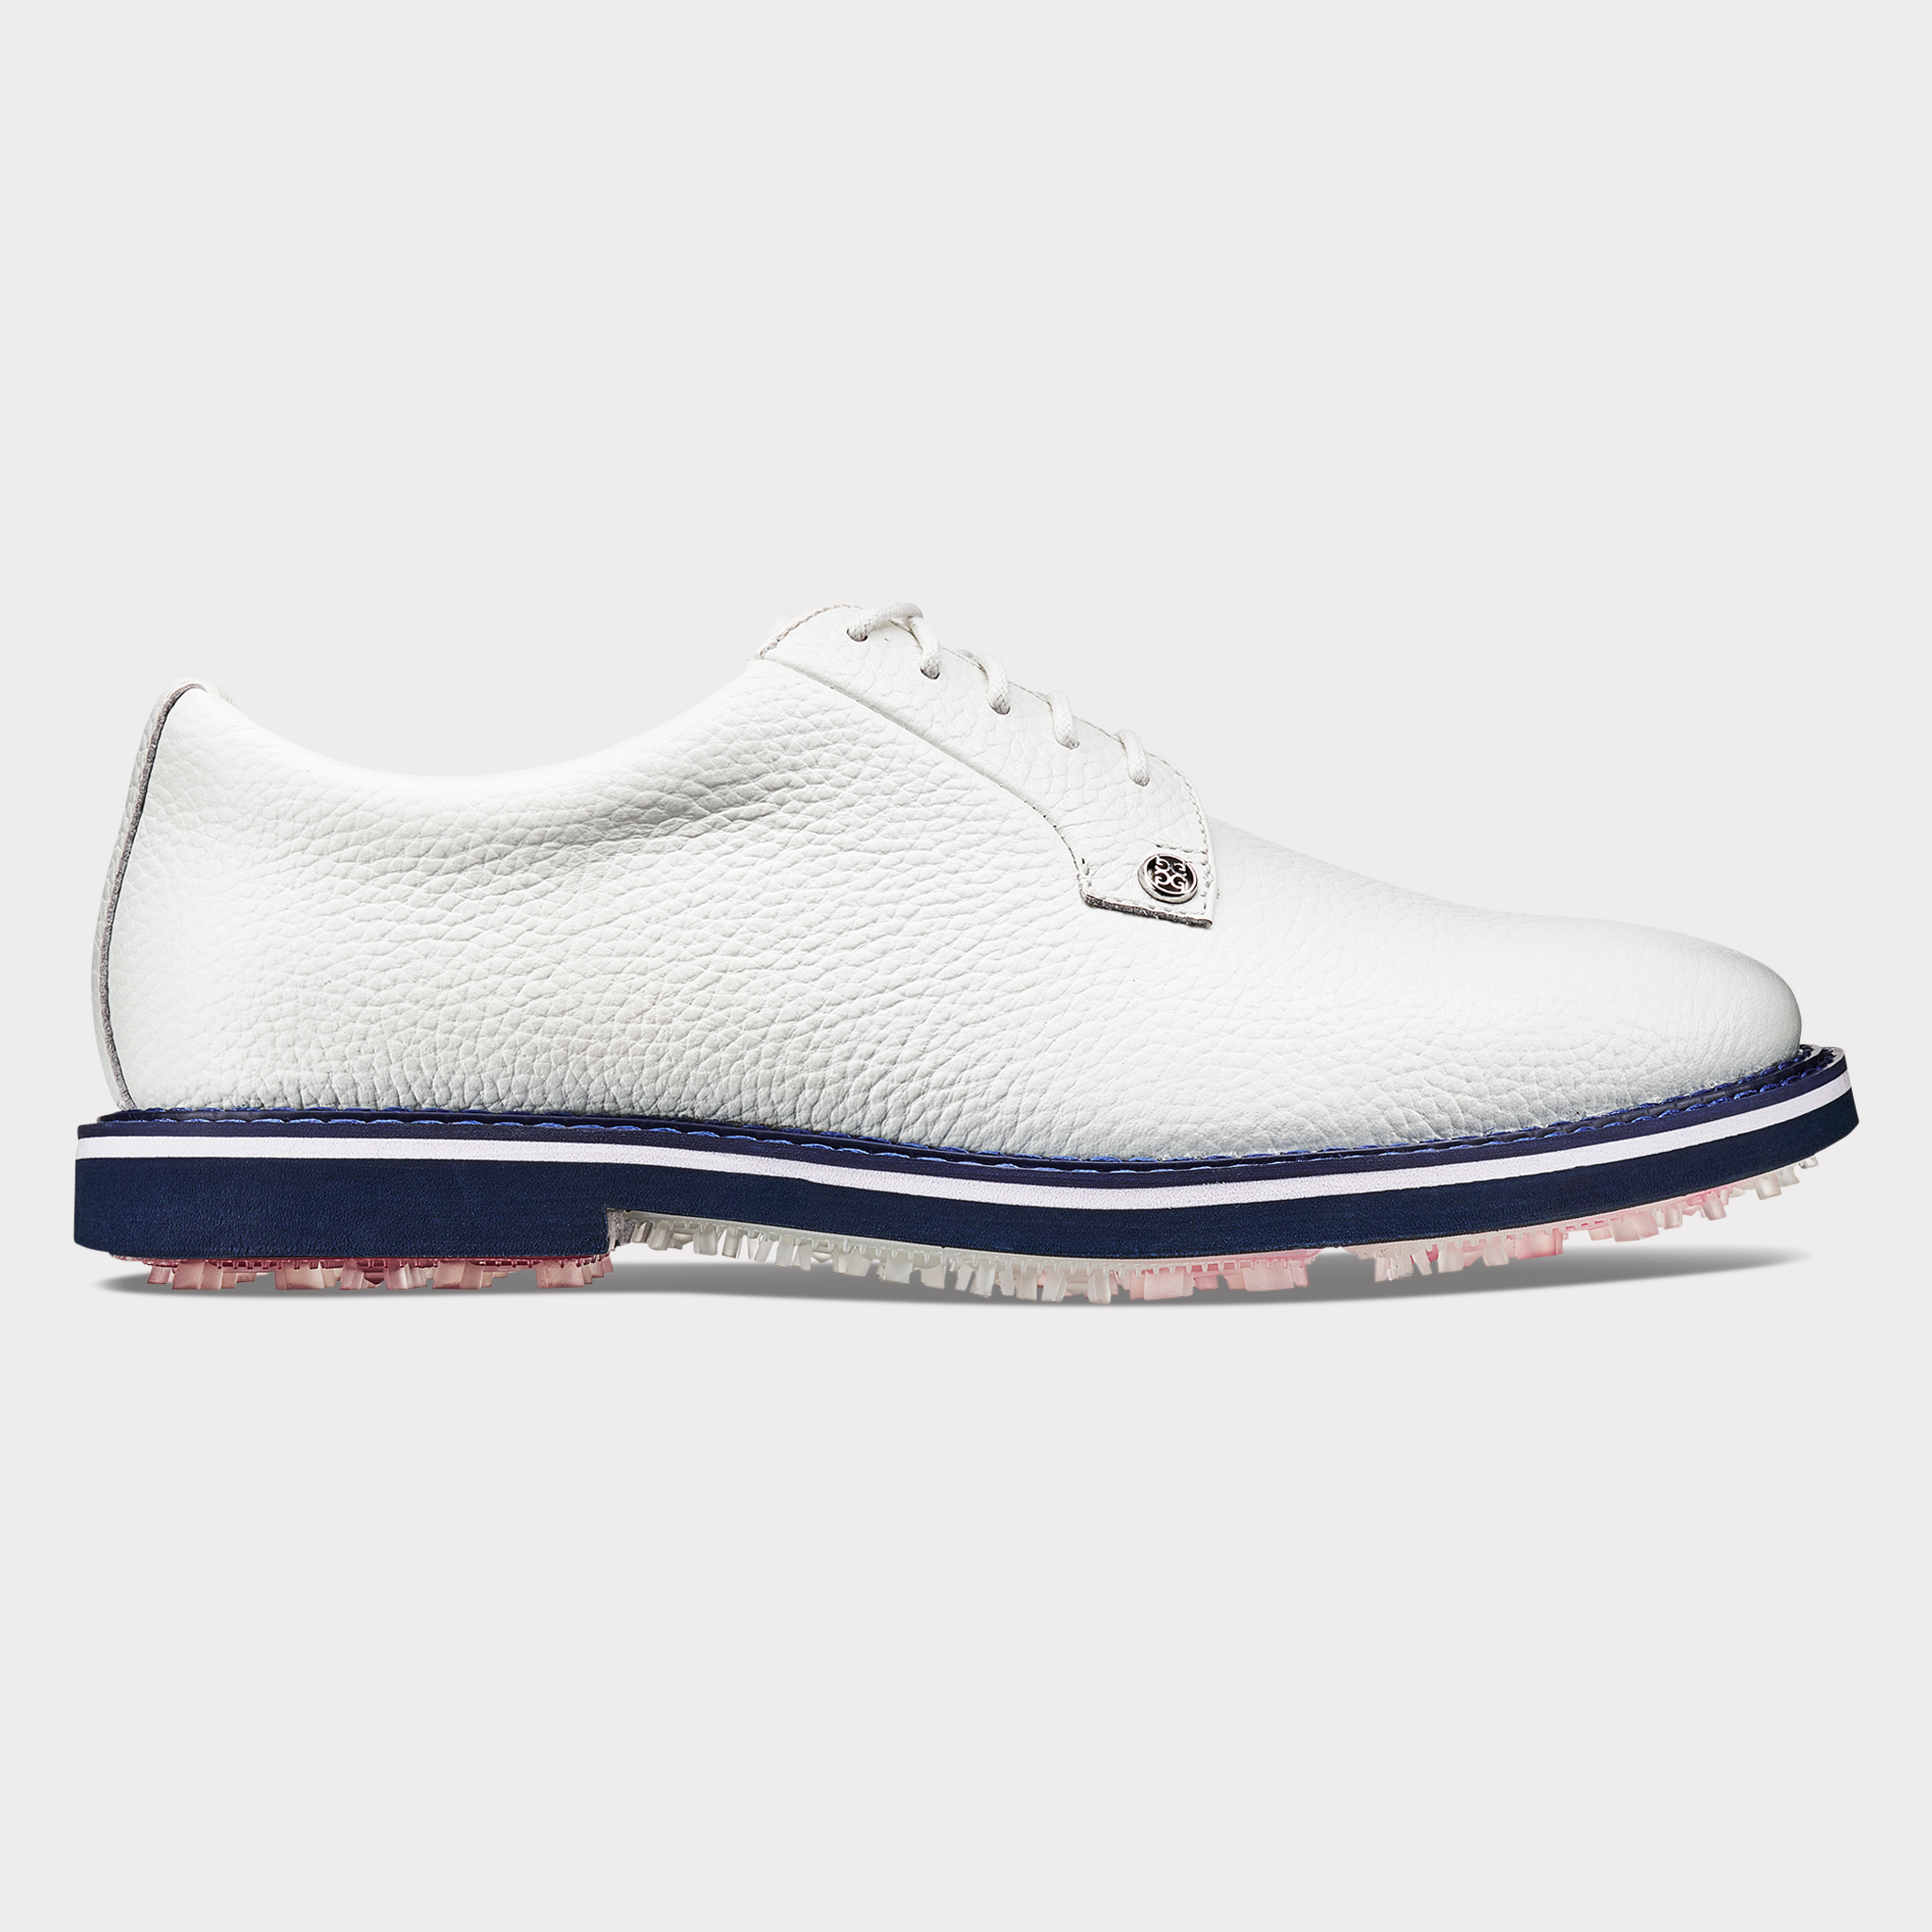 MEN'S COLLECTION GALLIVANTER GOLF SHOE – G/FORE | G/FORE